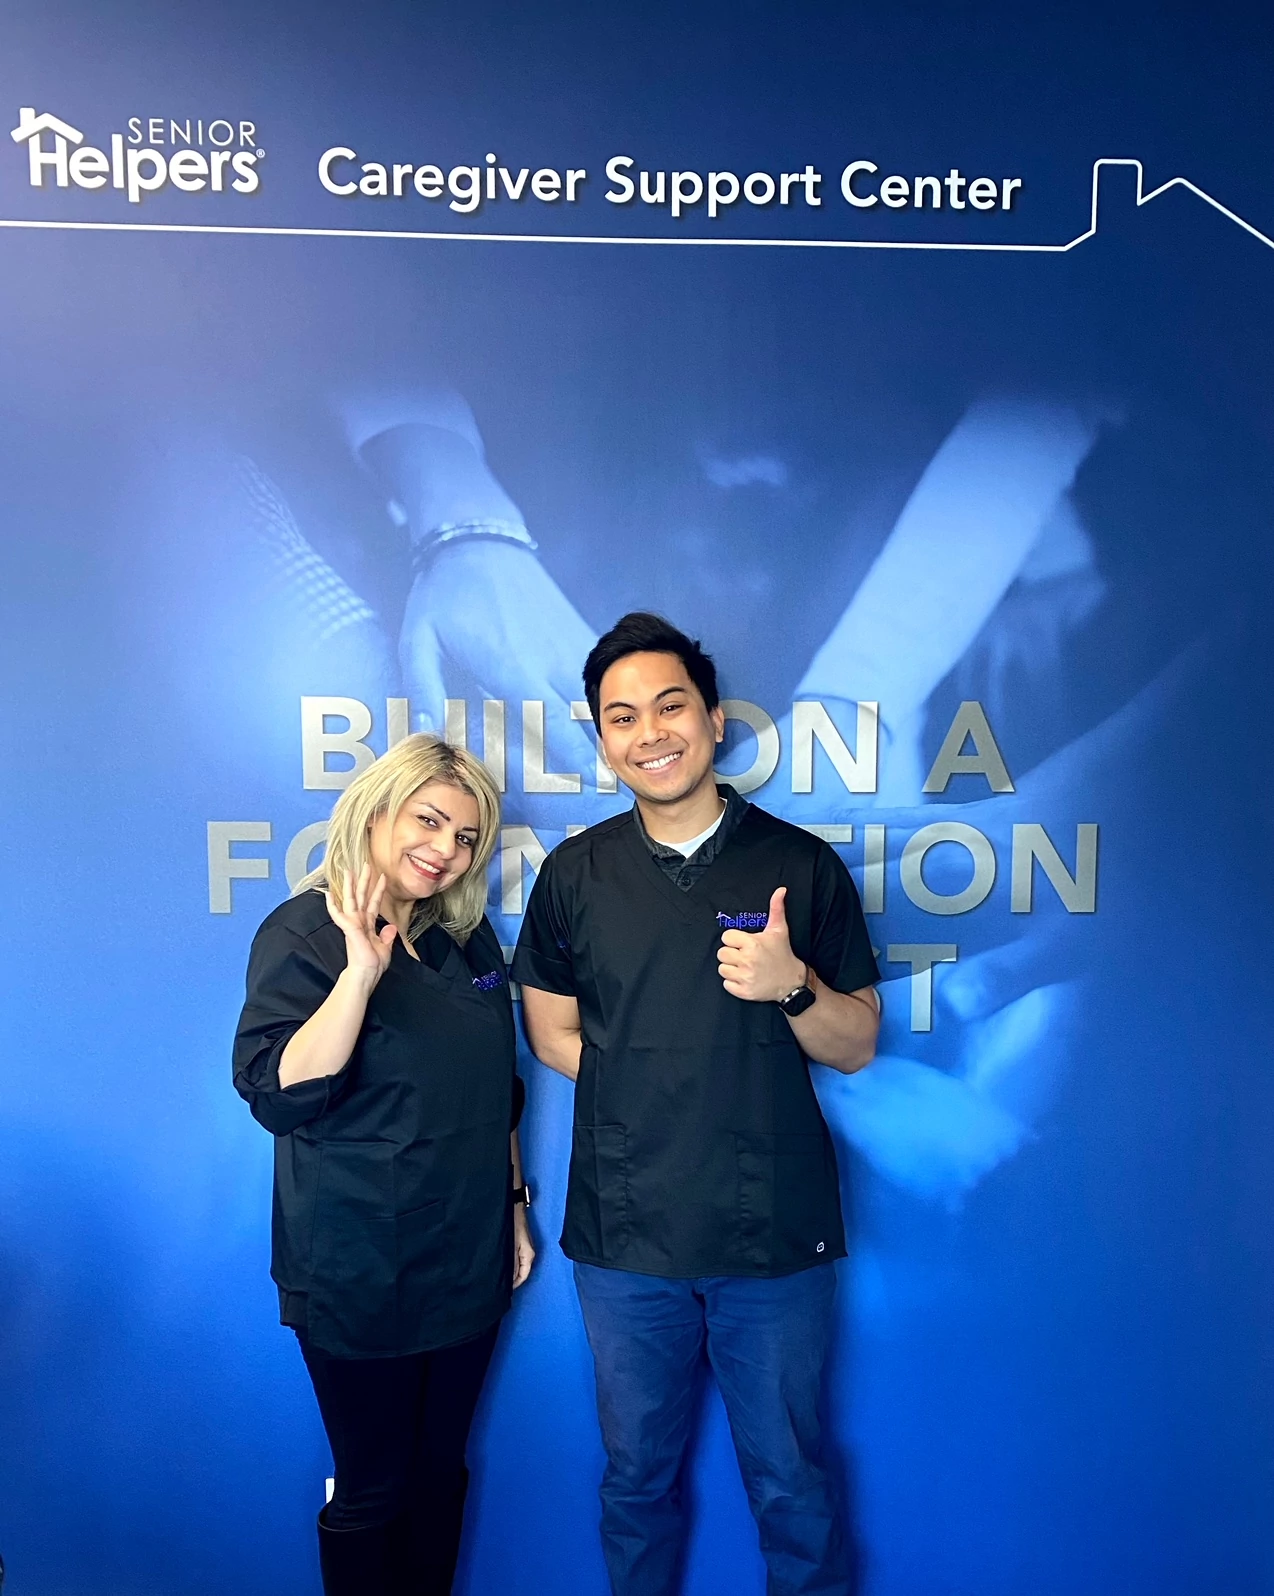 Always a good day when we have our Caregivers at the Support Center.  Welcome to the Family Niloofar and Crispaul!